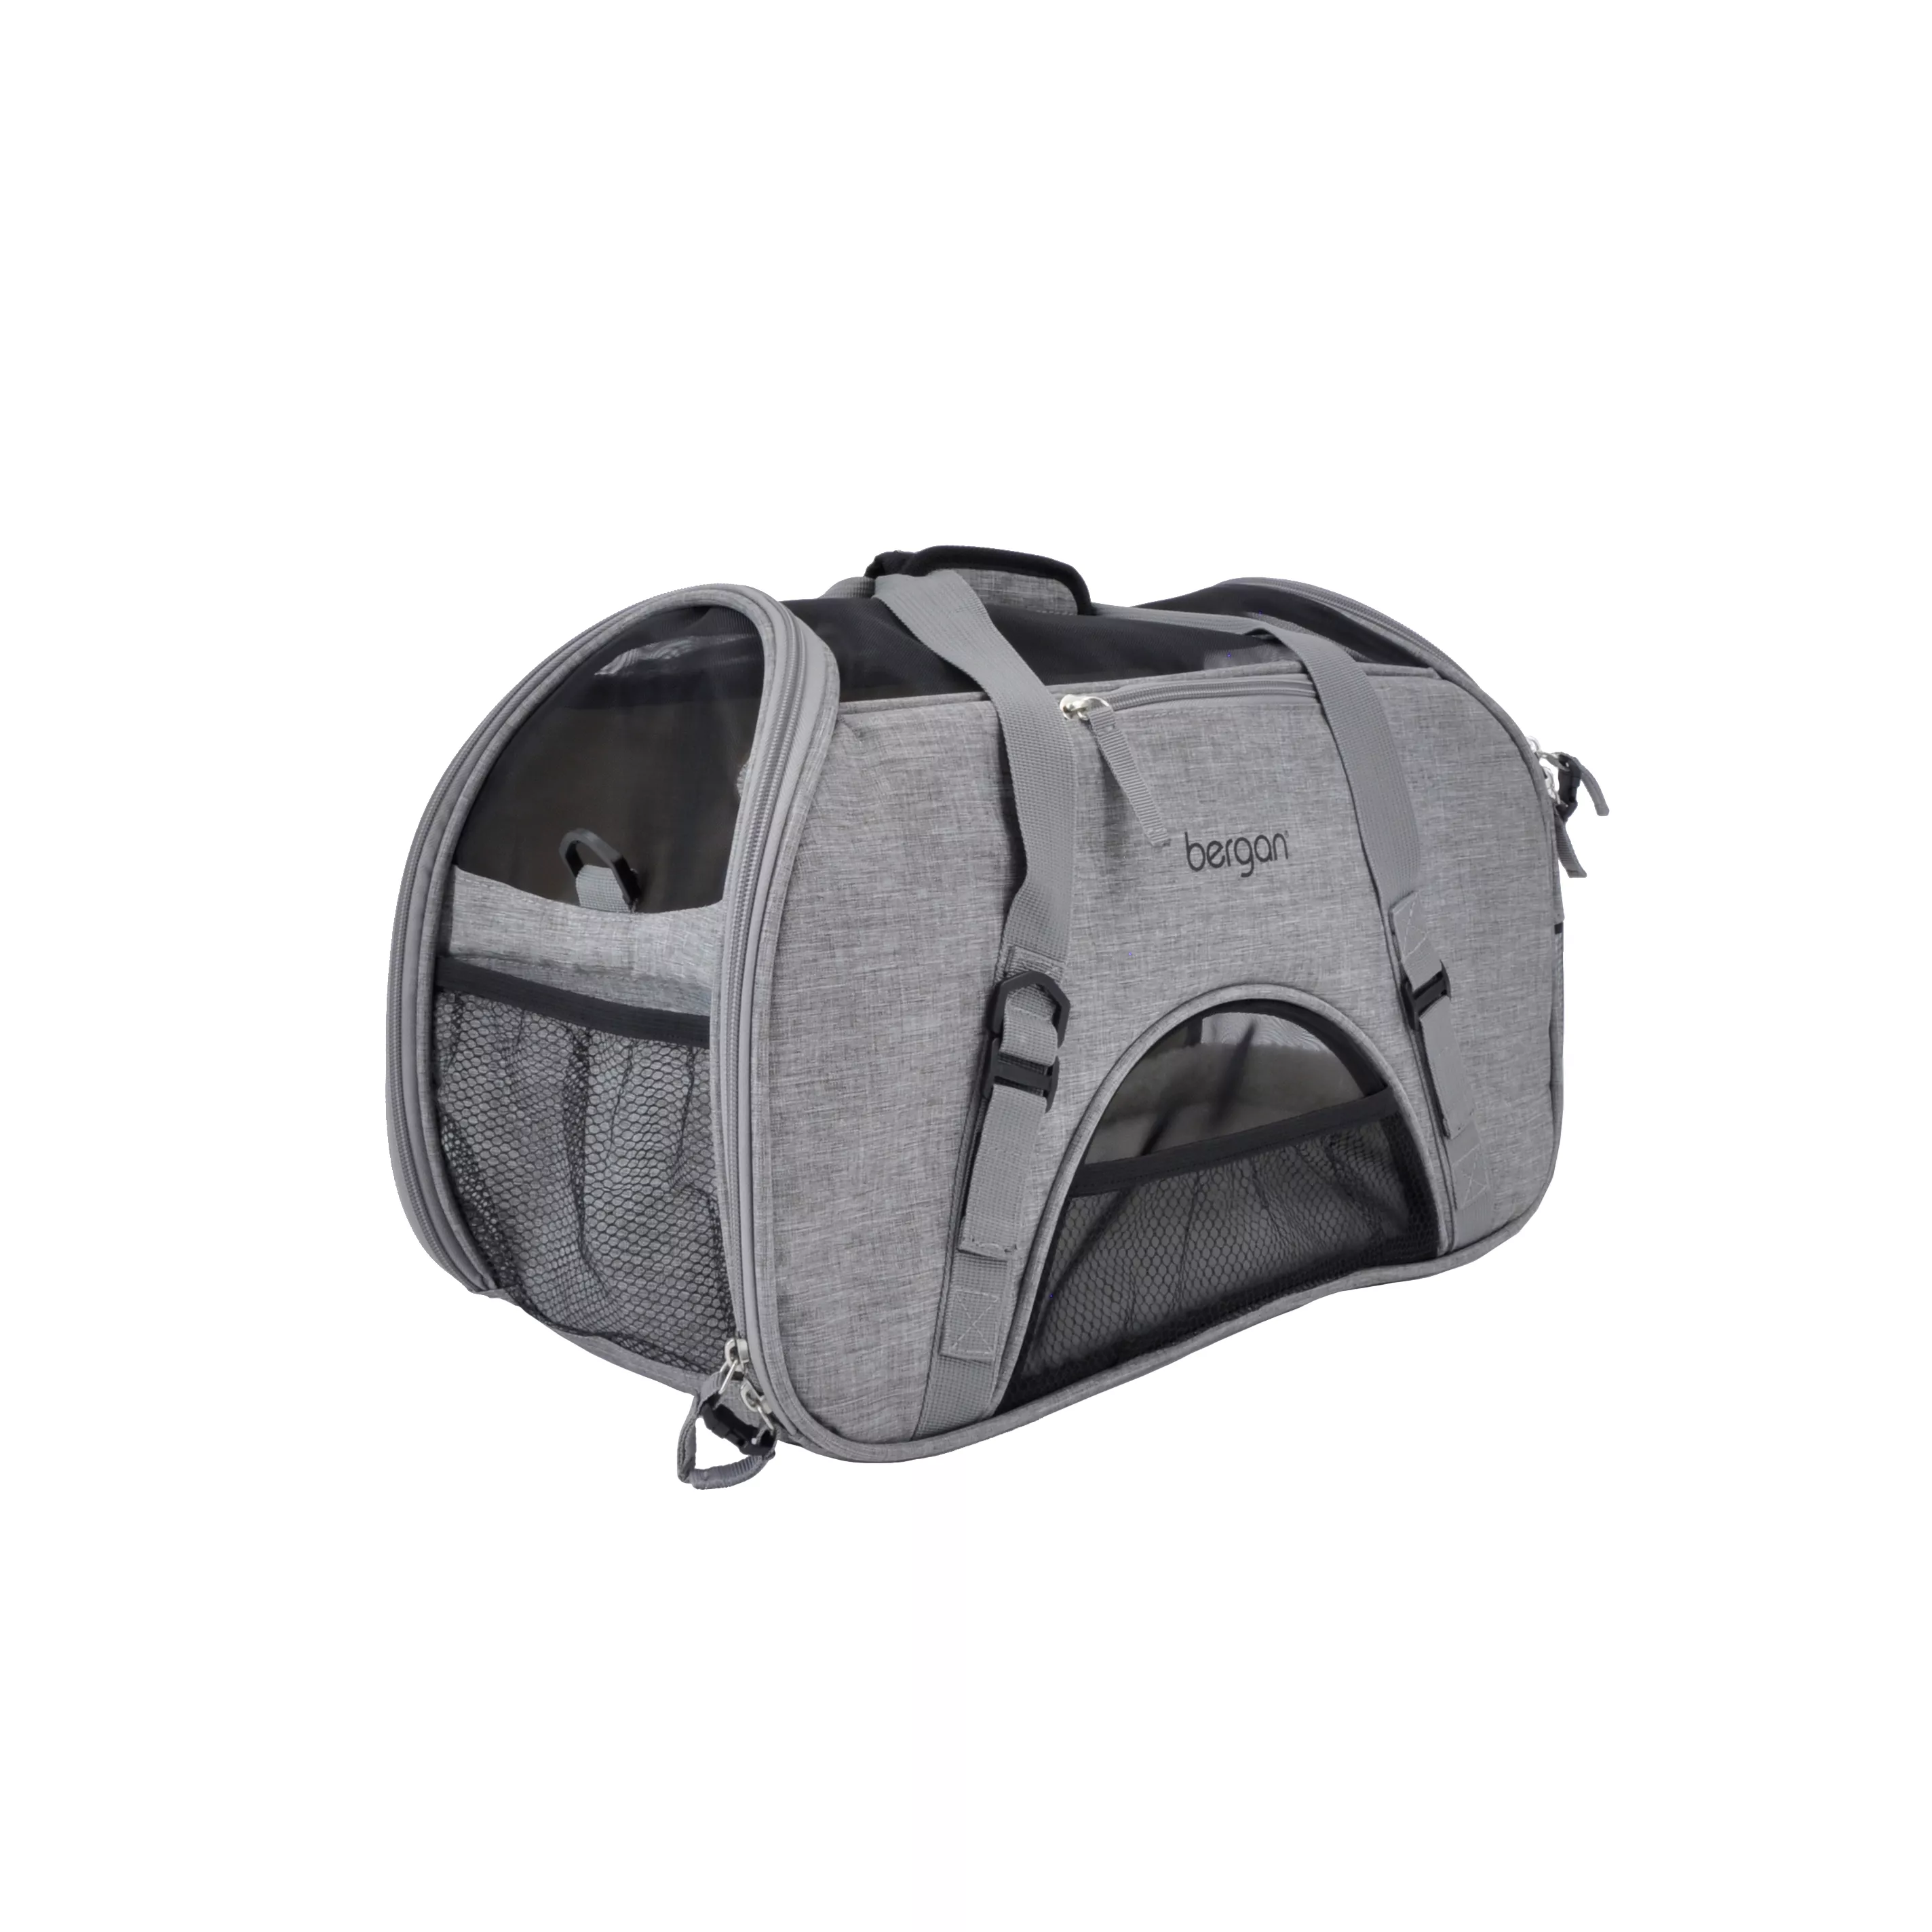 Portable Cat Carrier Pet Travel Carrier Bag for Small Medium Dogs Cats, Dog  Comfort Bag Travel Case, Airline Approved, Grey